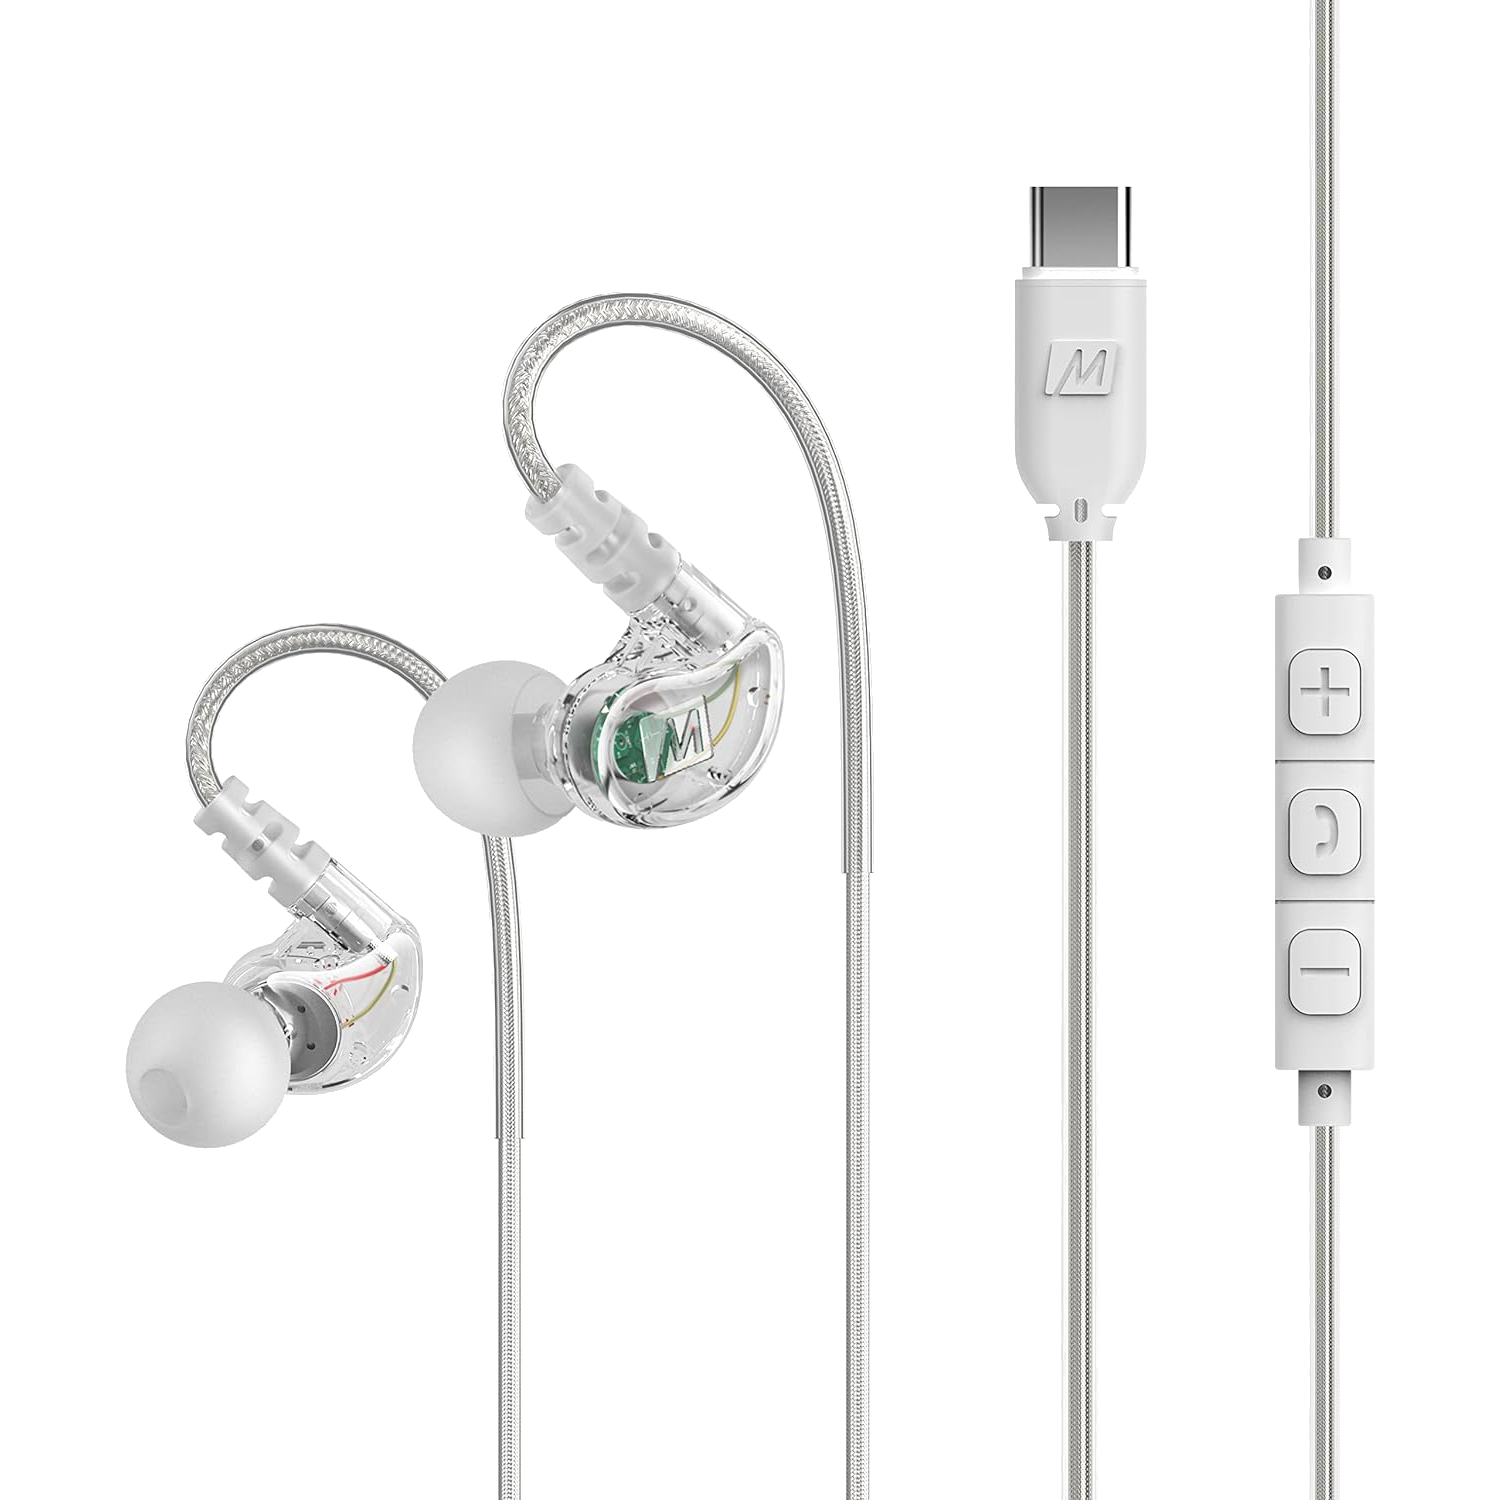 MEE Audio M6 Sport show on a transparent background.